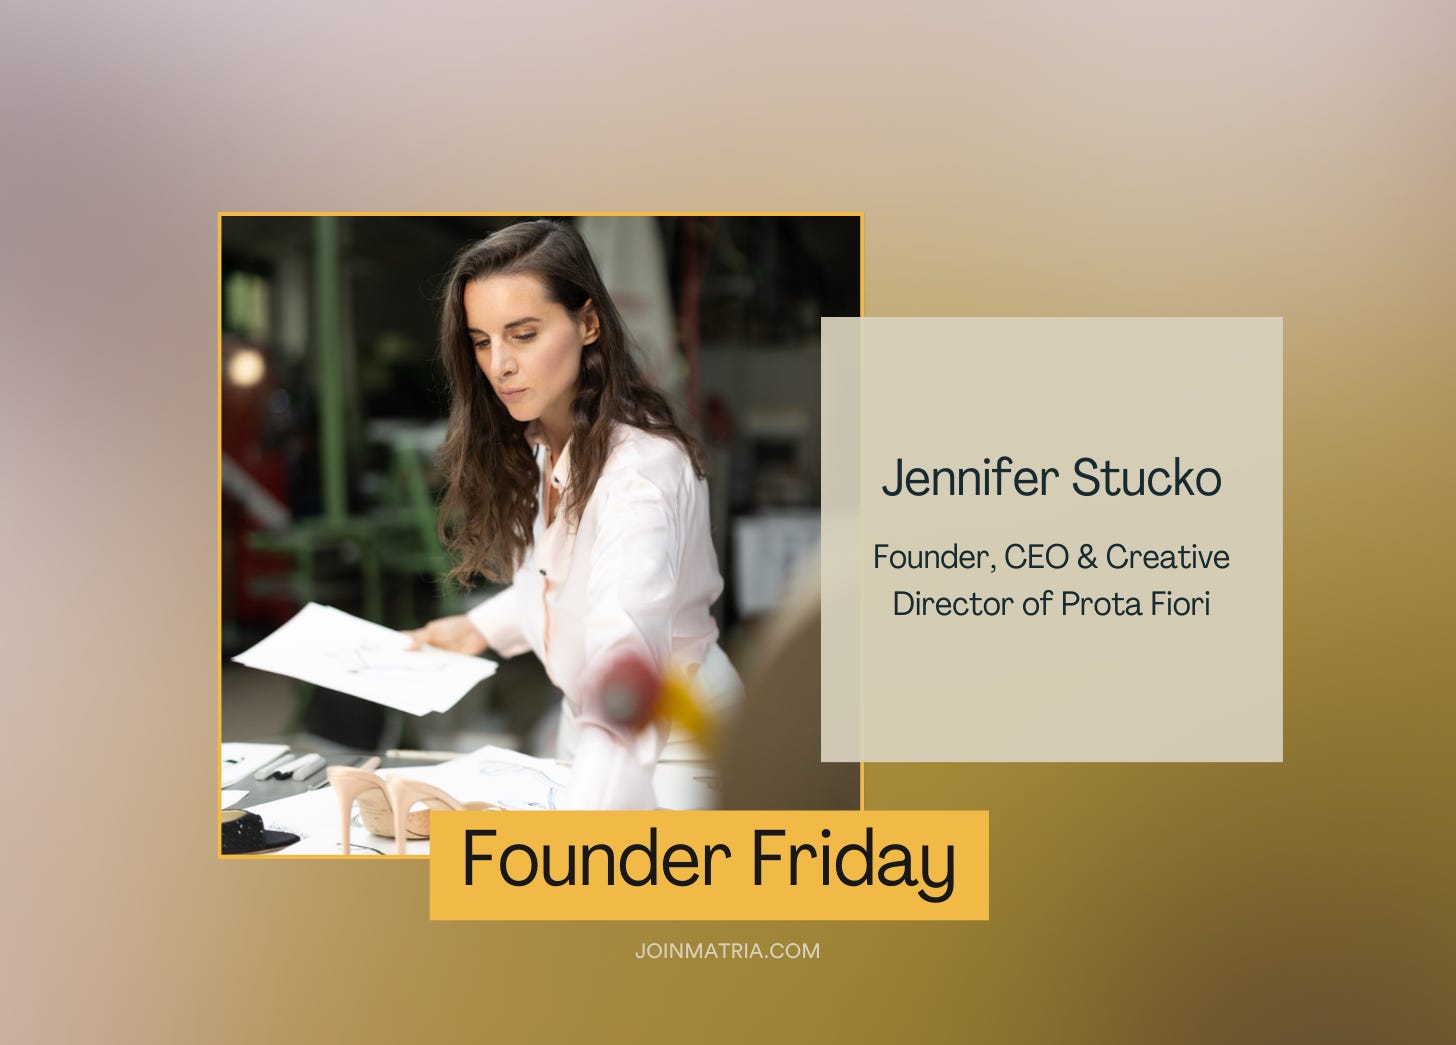 Matria's Founder Friday series highlights female founded businesses. This week, we're sharing Jennifer Stucko, Founder, CEO and Creative Director of Prota Fiori.